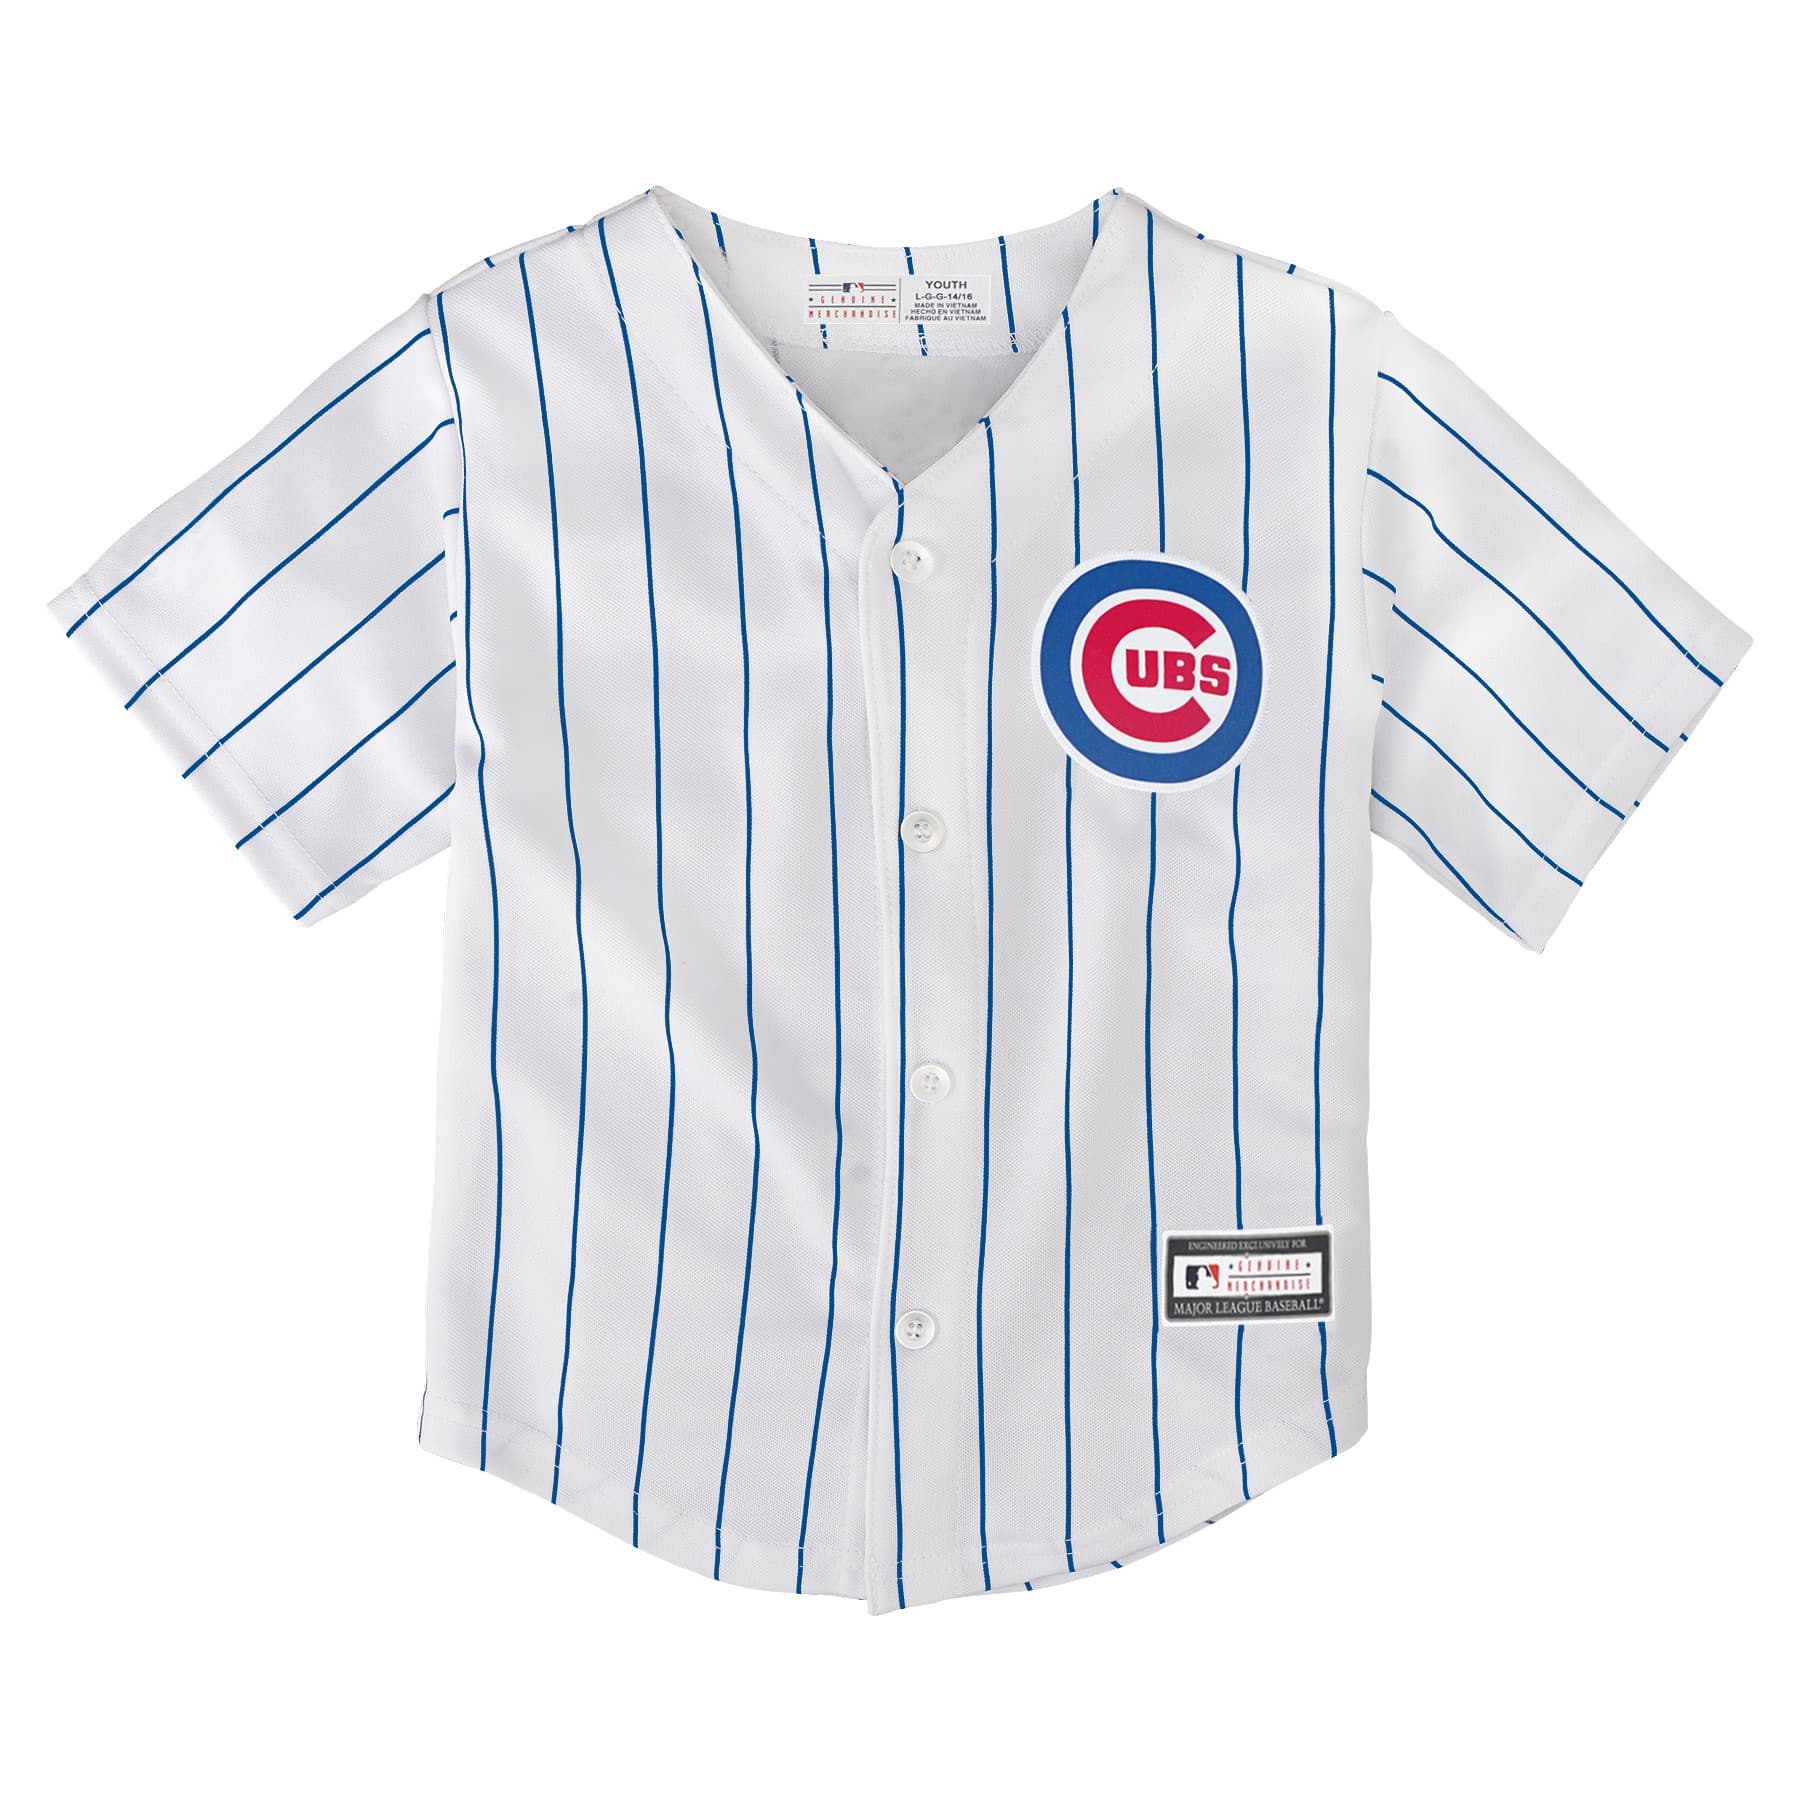 Chicago Cubs YOUTH Majestic MLB Baseball jersey HOME White